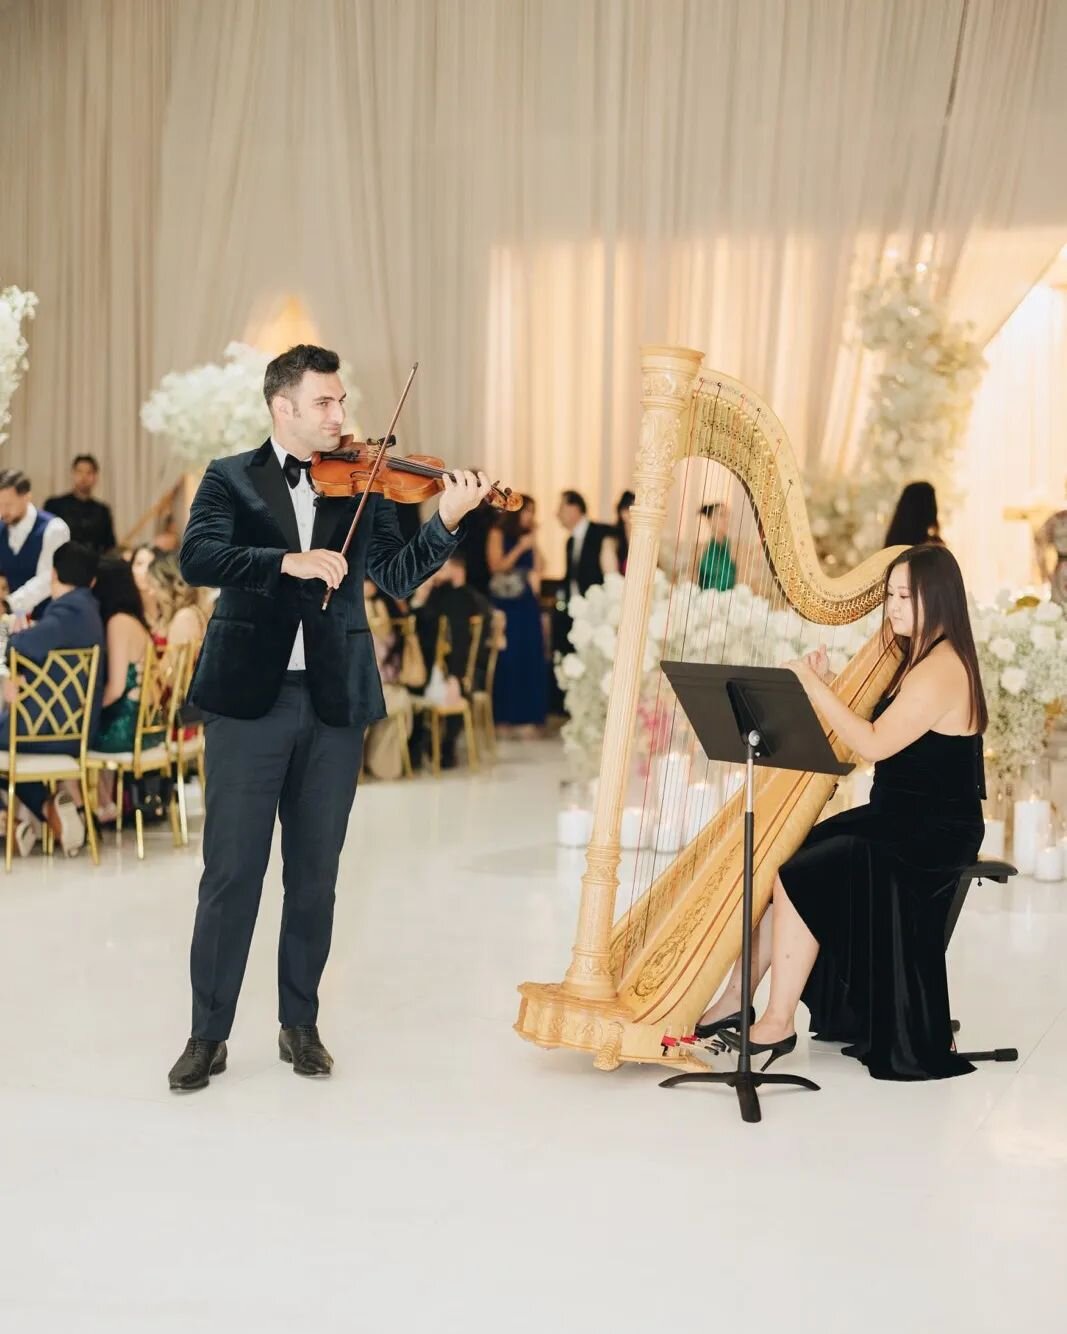 There's just something about first dances at Palladio Banquet Hall.

Our shimmering strings accompanied this classy couple dancing to Andrea Bocelli's &quot;L'appuntamento&quot;.

Thank you for having us add our special touch to your wedding receptio